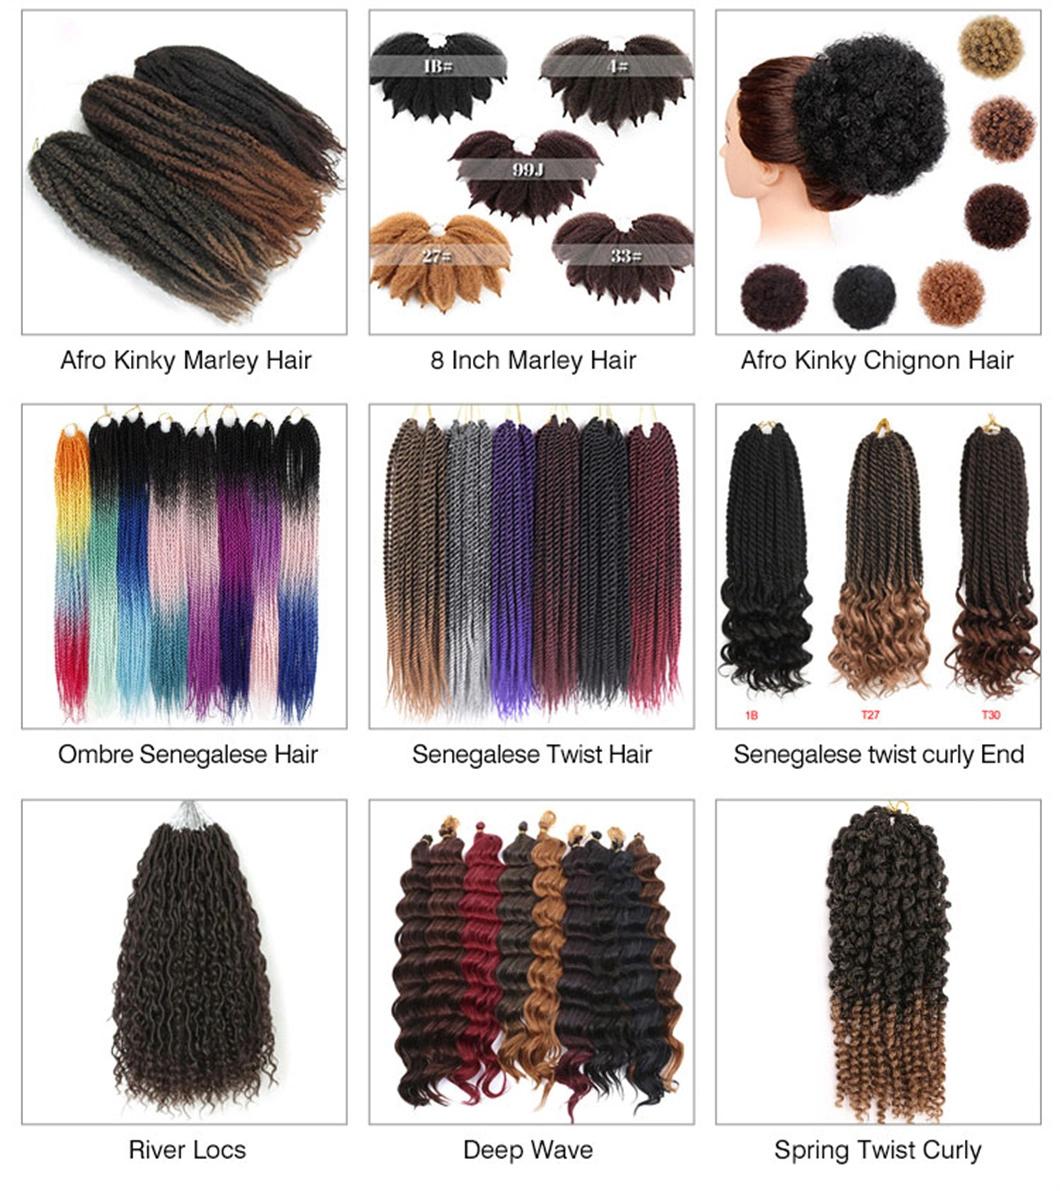 Wholesale Fashion Short Thick Synthetic Natural Curly Drawstring Ponytail Extensions Claw Clip Fake Hair Piece Tail Wavy